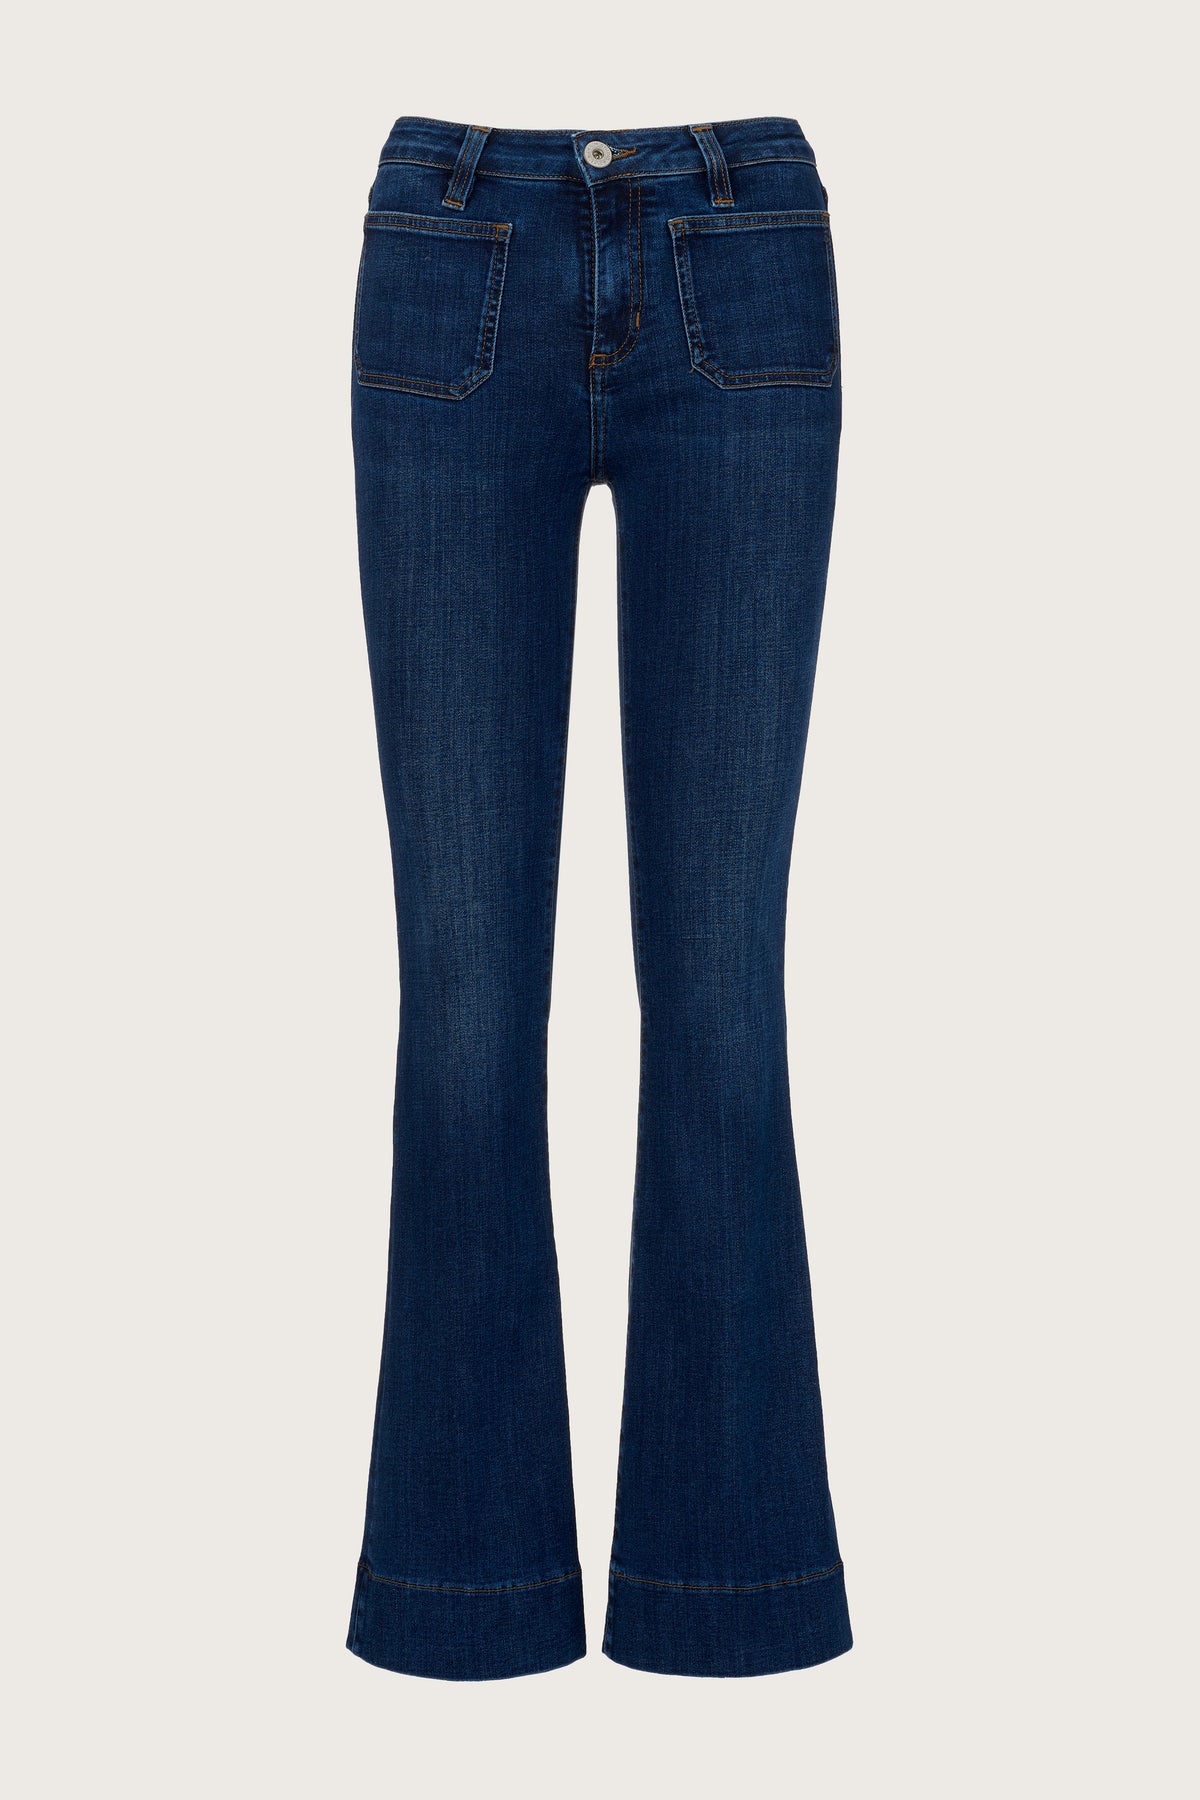 Slim boot cut jeans with front patch pockets